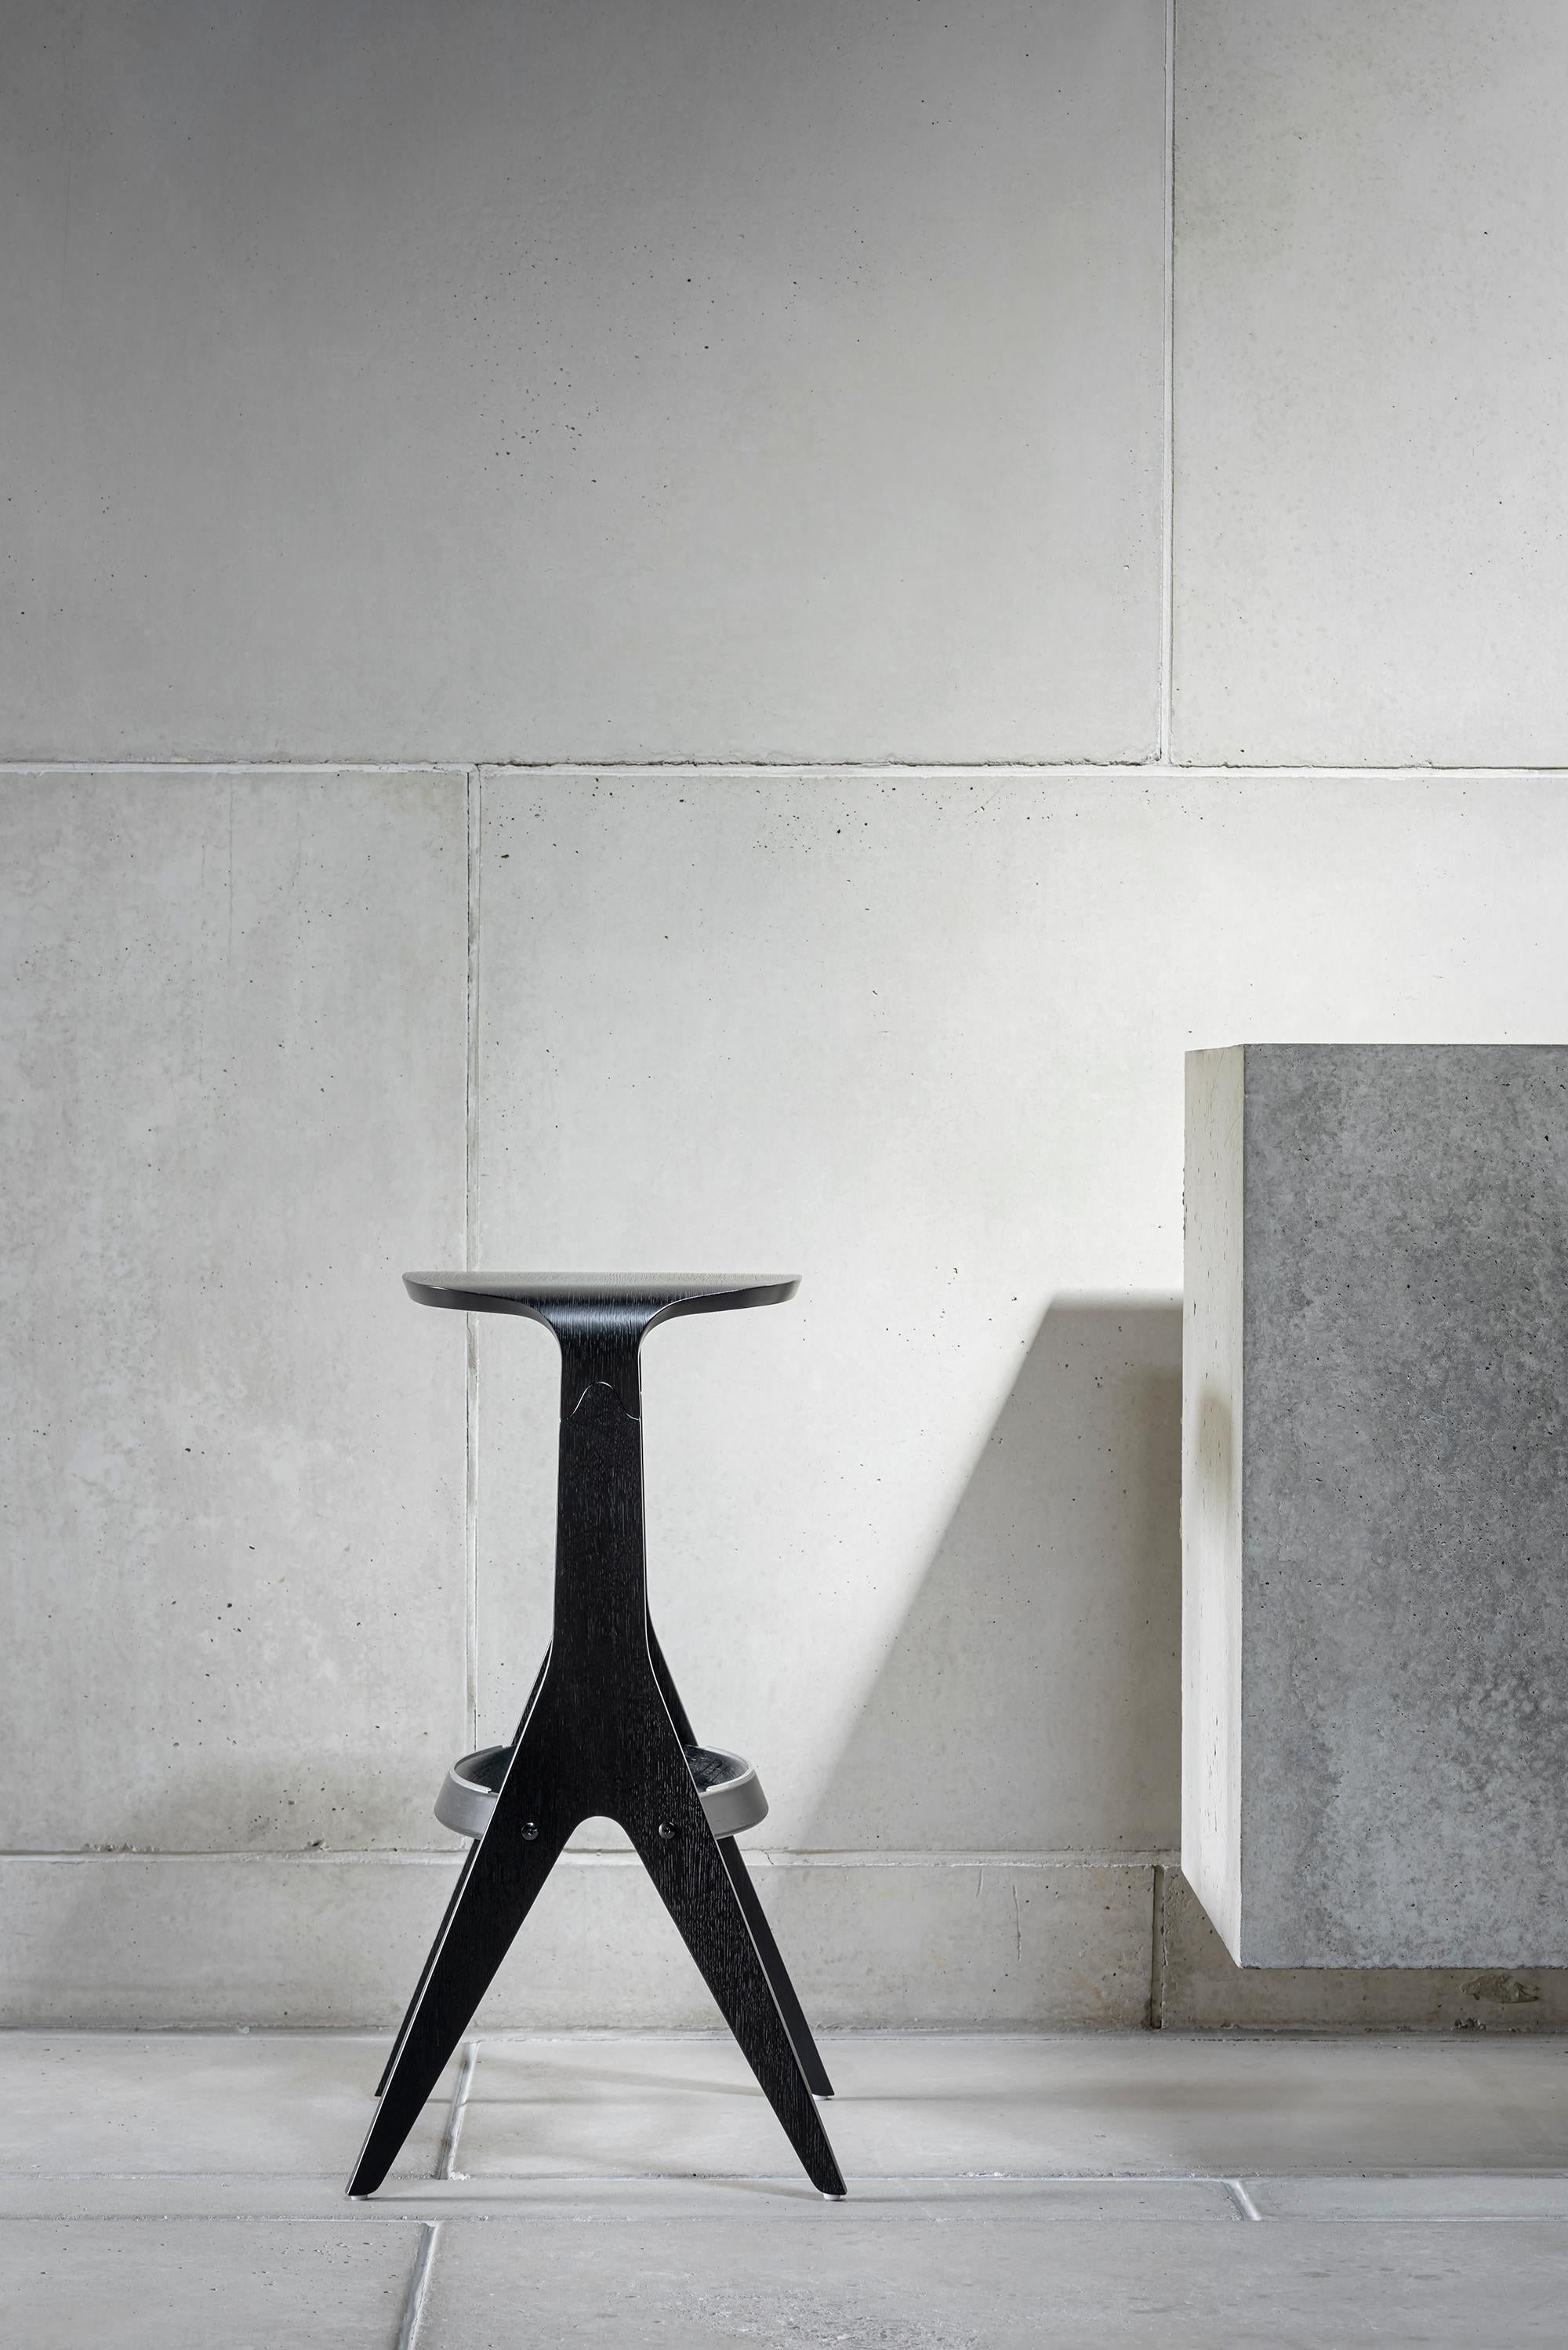 Counter stool Lavitta 65 by Poiat
Designers: Timo Mikkonen & Antti Rouhunkoski 
Lavitta 2020

Model shown: Black oak 
Dimensions: H. 65 x 50 x 44 cm

The latest member of the Lavitta Collection, the Lavitta Counter Stool continues focusing on